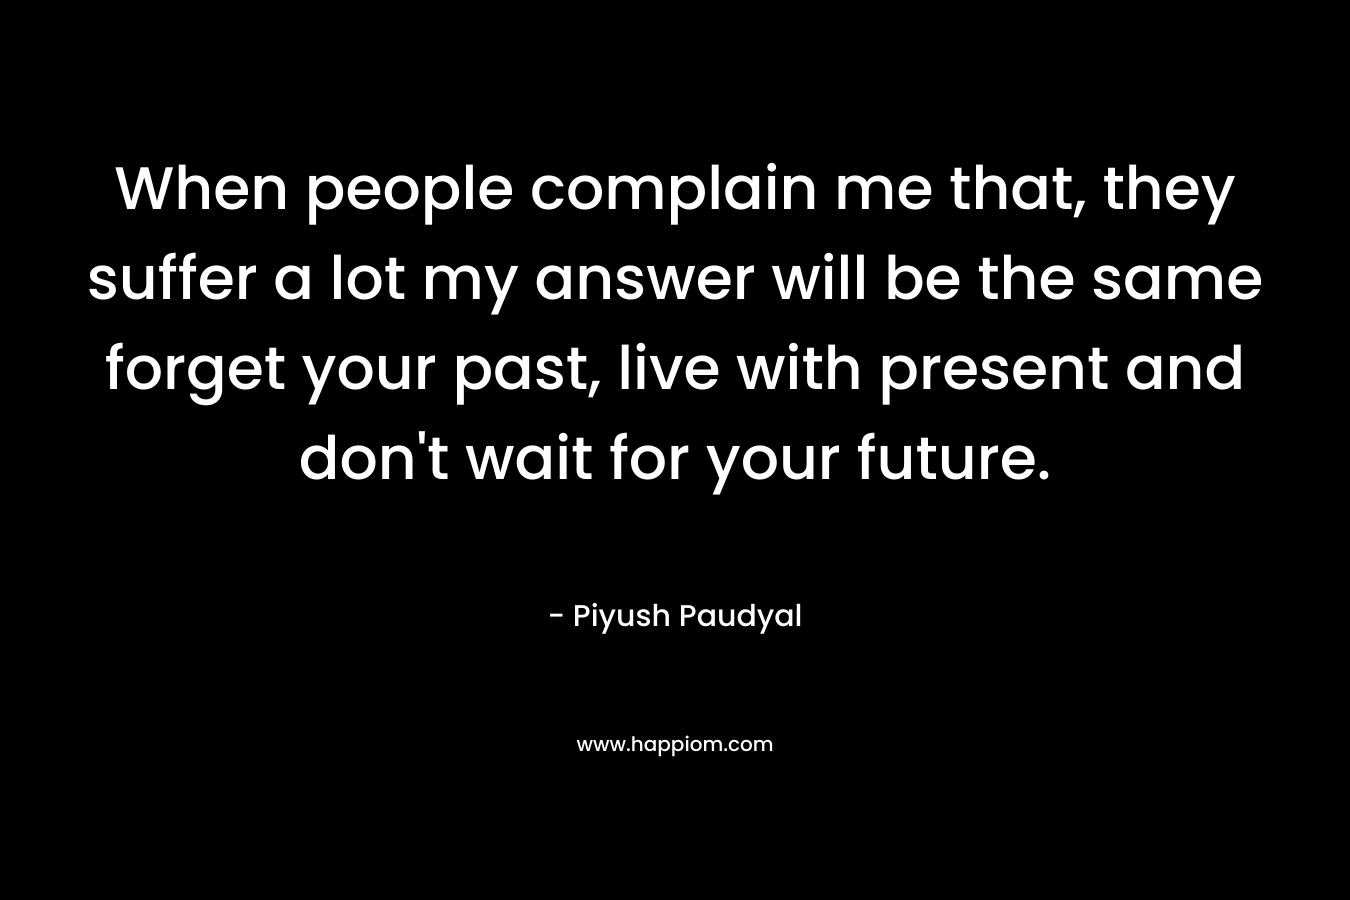 When people complain me that, they suffer a lot my answer will be the same forget your past, live with present and don't wait for your future.